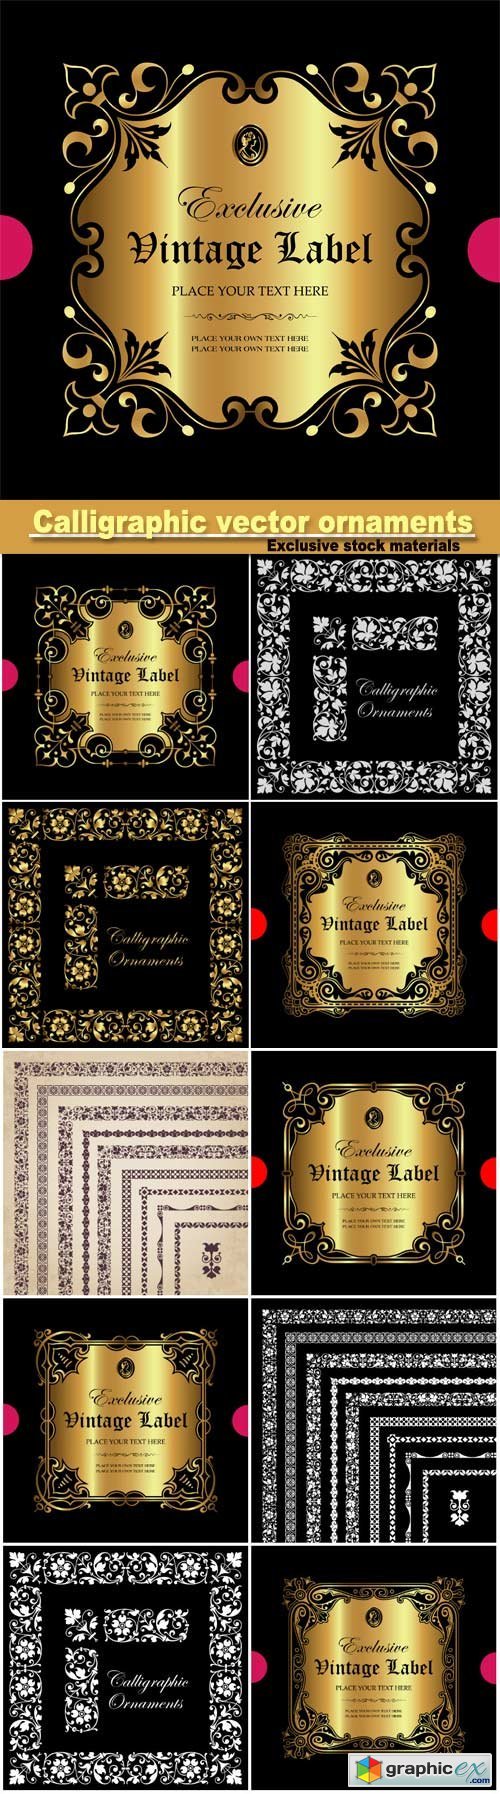 Calligraphic vector ornaments, borders and frames